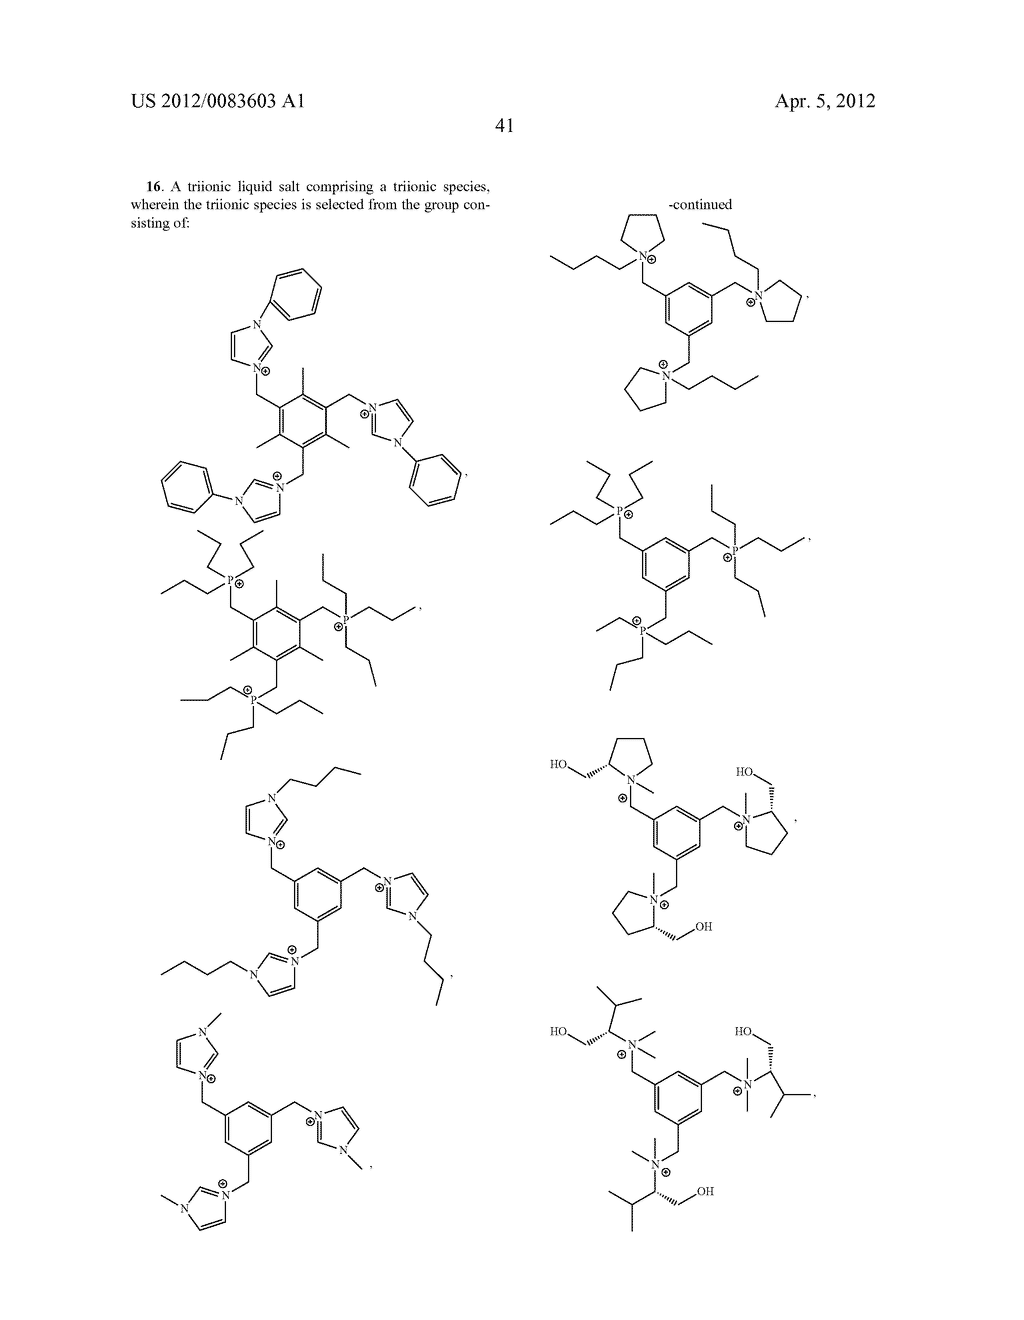 HIGH STABILITY POLYIONIC LIQUID SALTS - diagram, schematic, and image 45